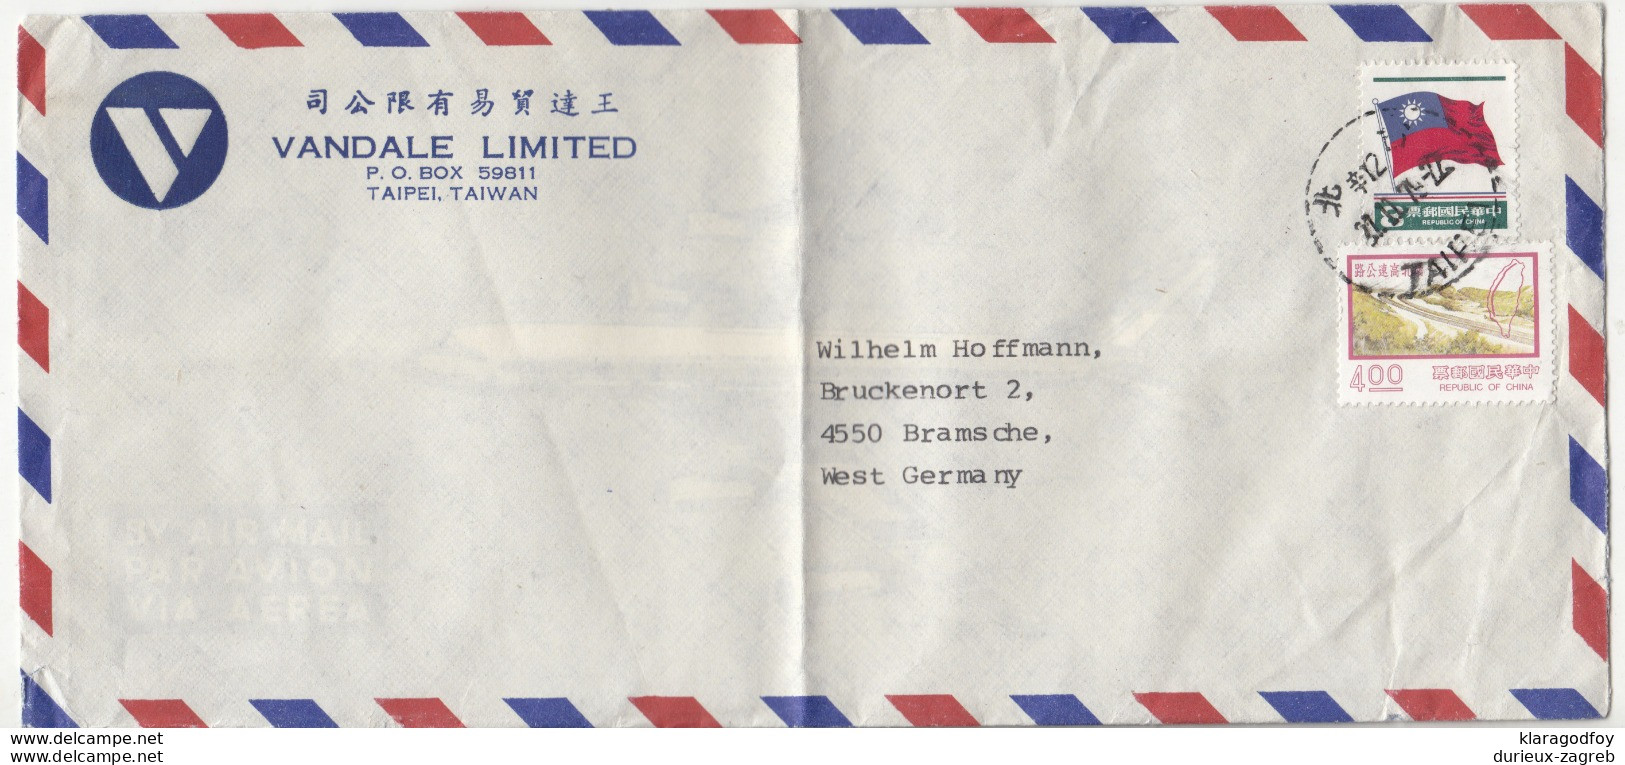 Vandale Limited Taipei Company Air Mail Letter Cover Travelled 197? To Germany B190922 - Storia Postale